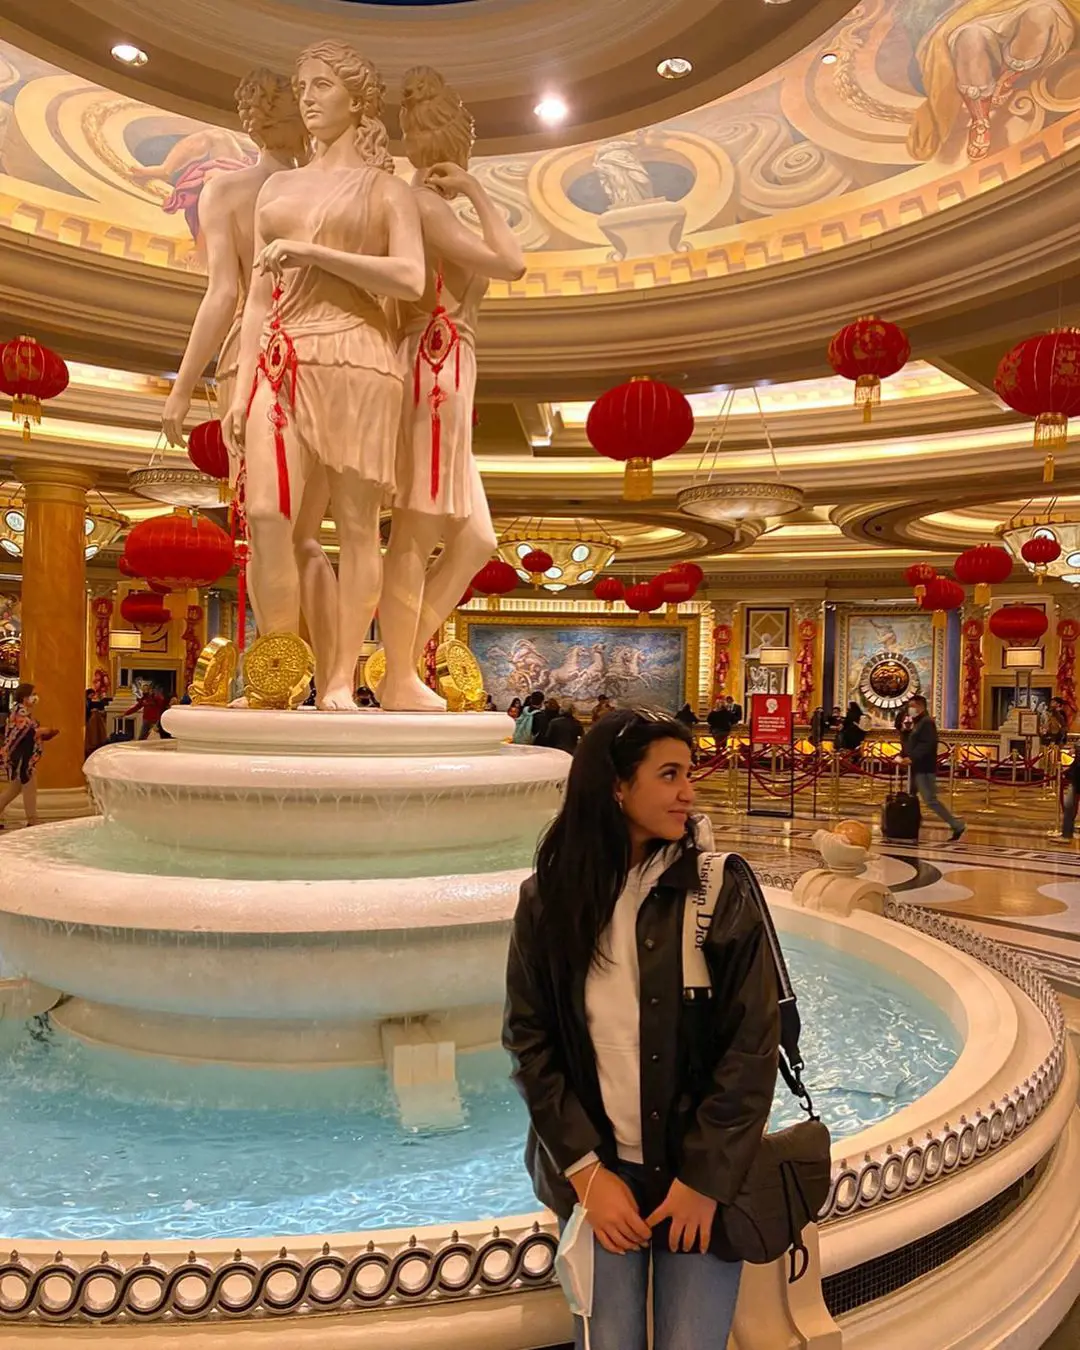 The Centre Player's Youngest Sister Rayanne At Ceasars Palace On 5 February 2022